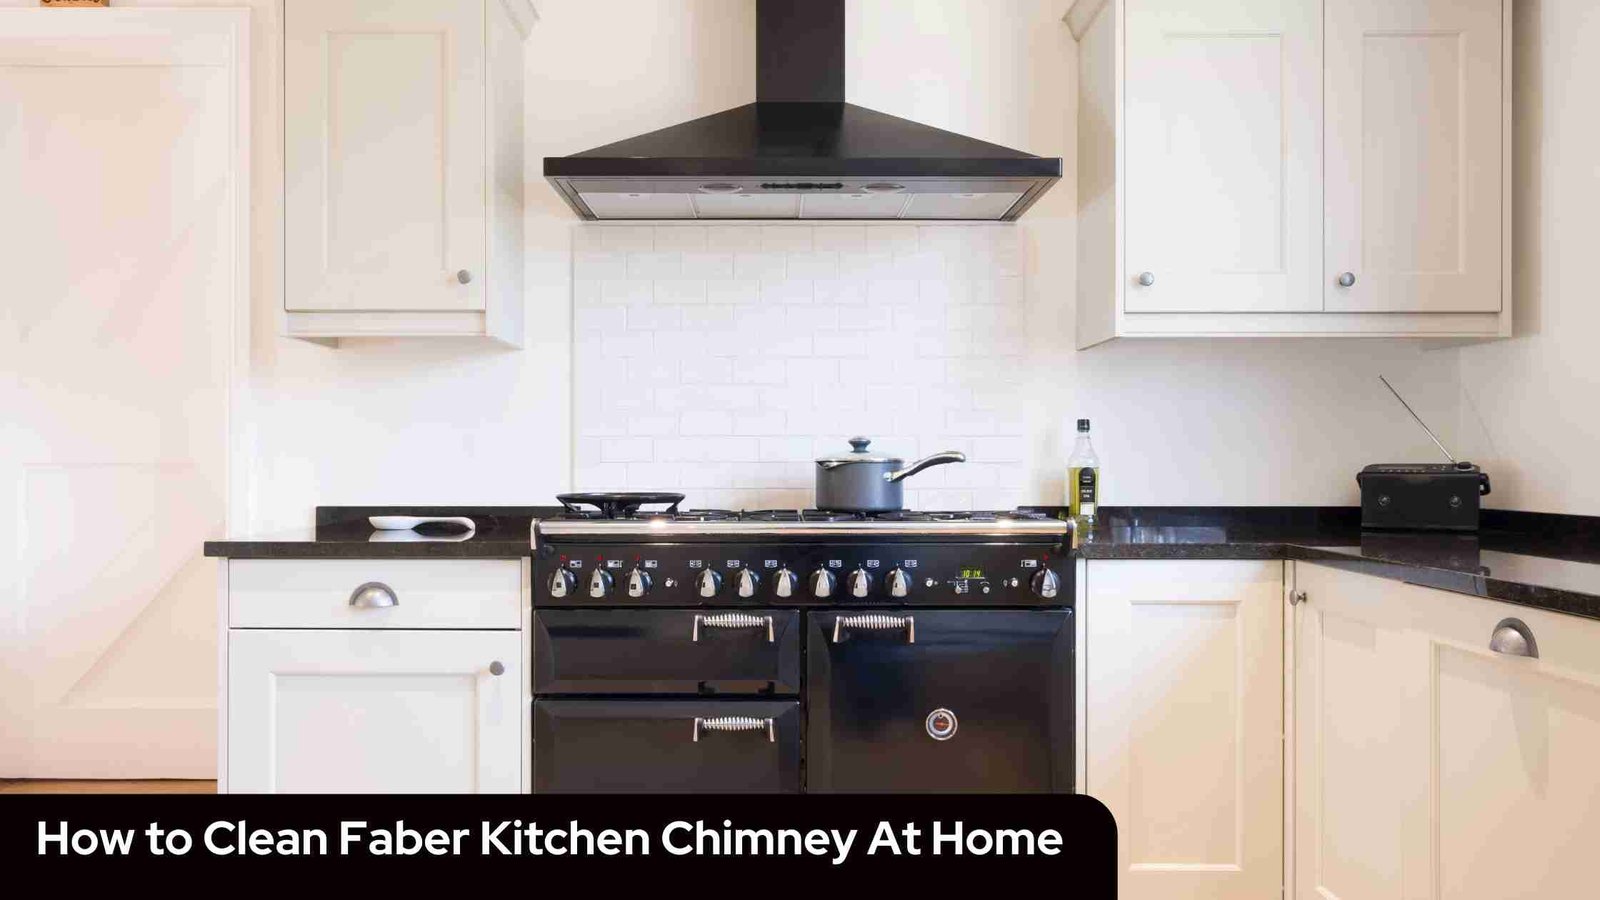 How to Clean Faber Kitchen Chimney At Home